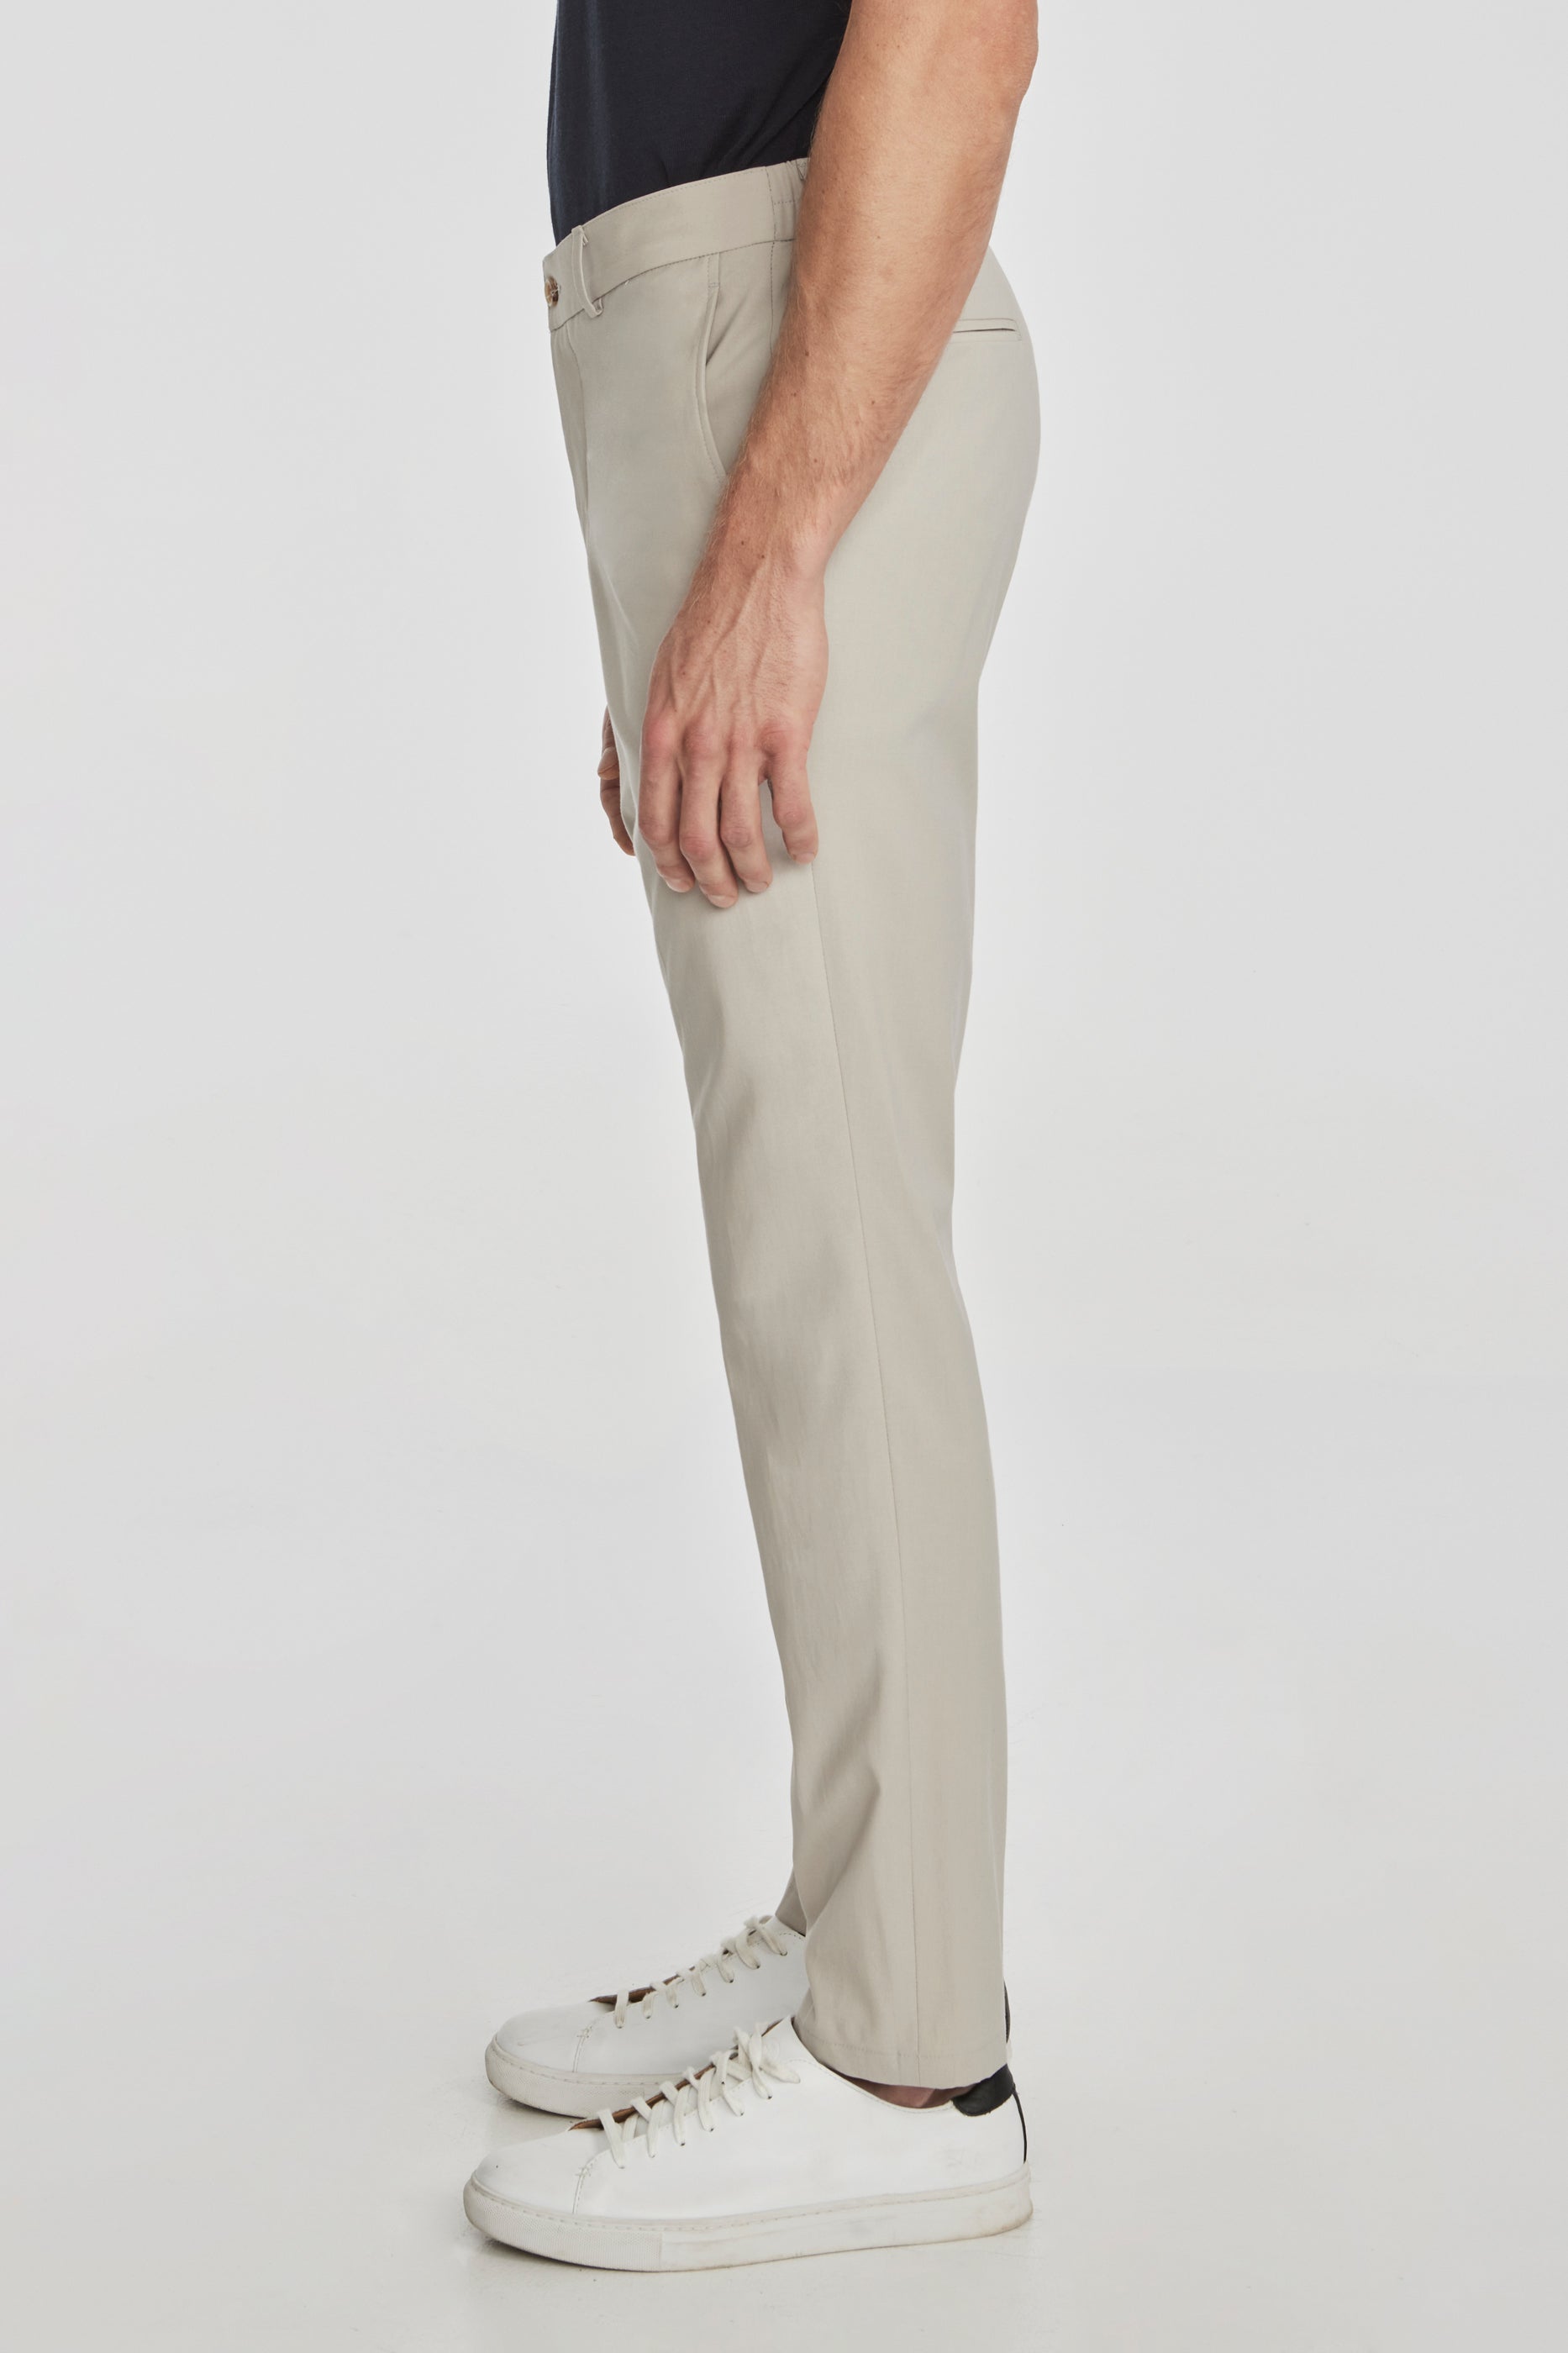 Alt view 4 Perth Wool and Cotton Stretch Pant in Tan